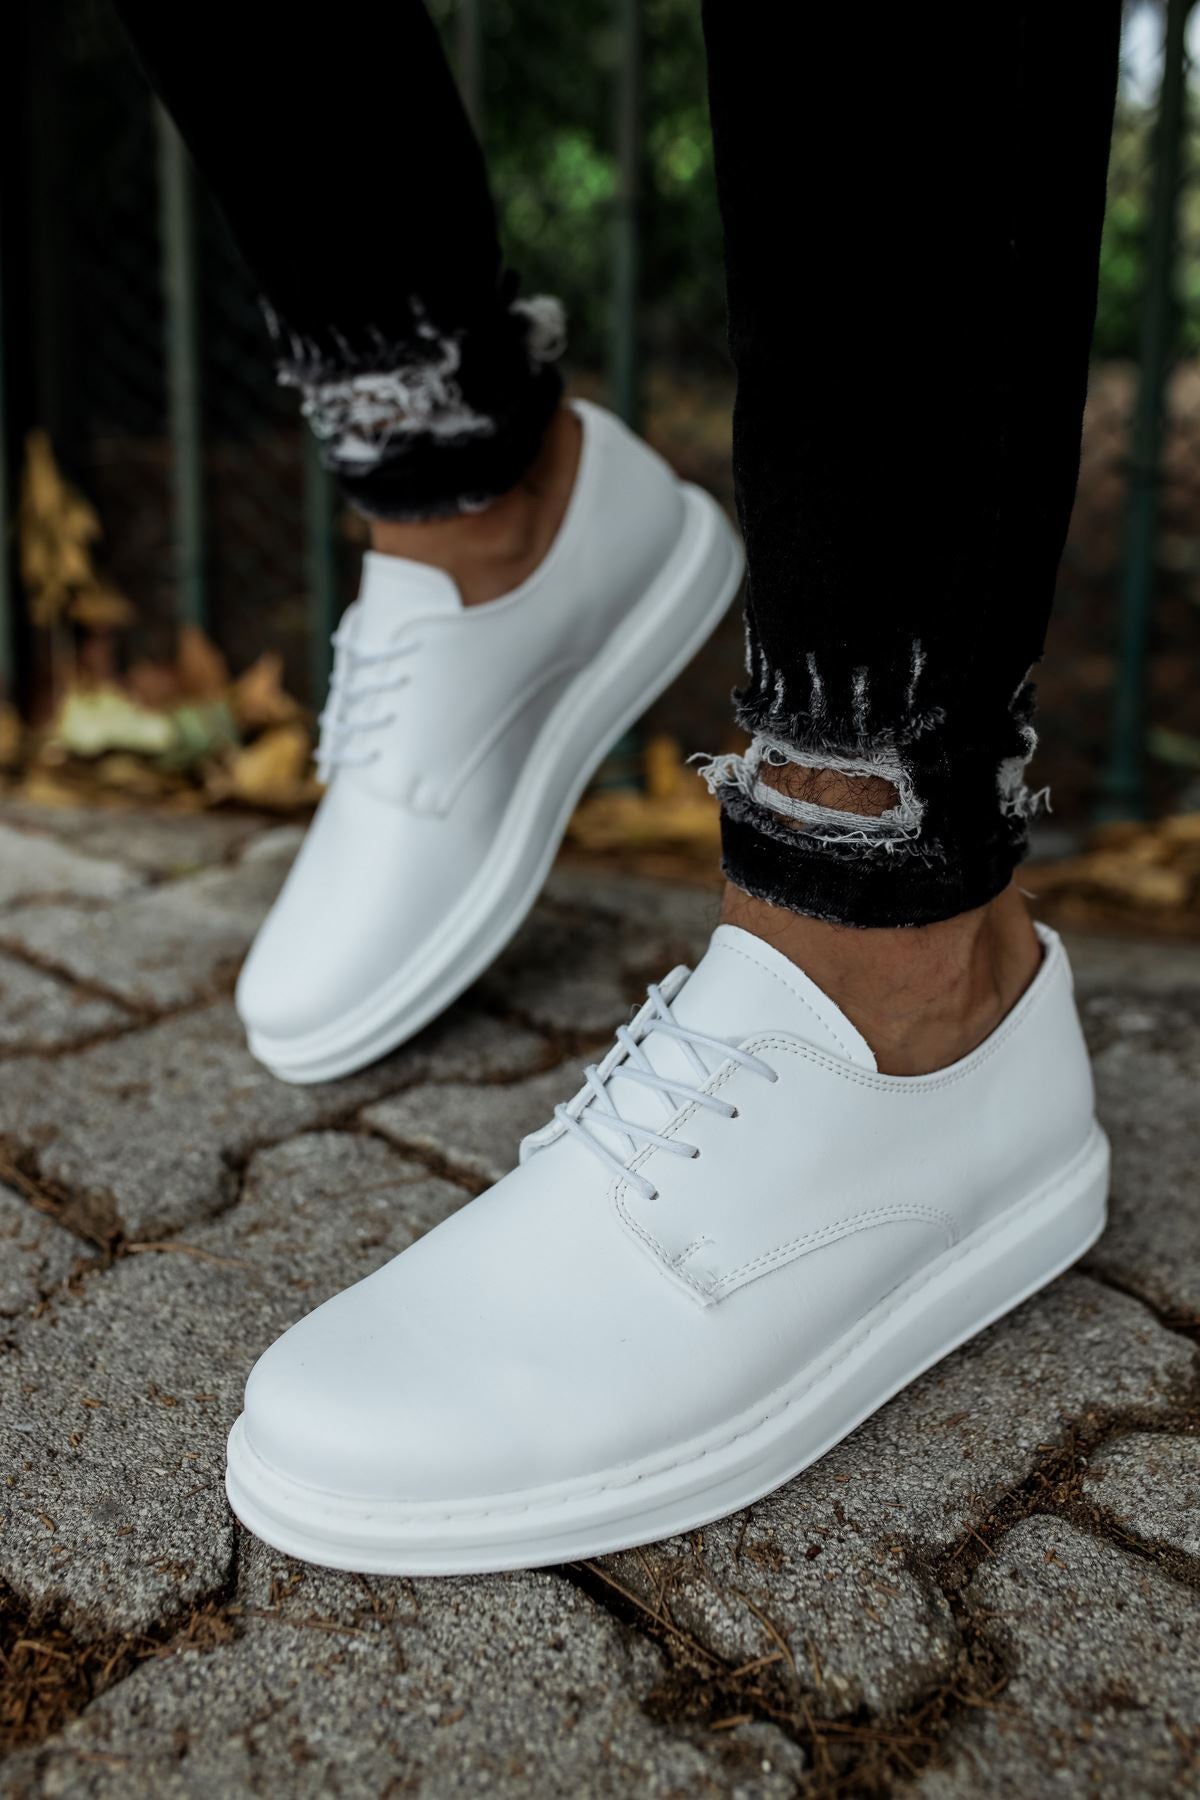 CH003 Men's Full White Matte Leather Casual Classic Sneaker Shoes - STREETMODE ™